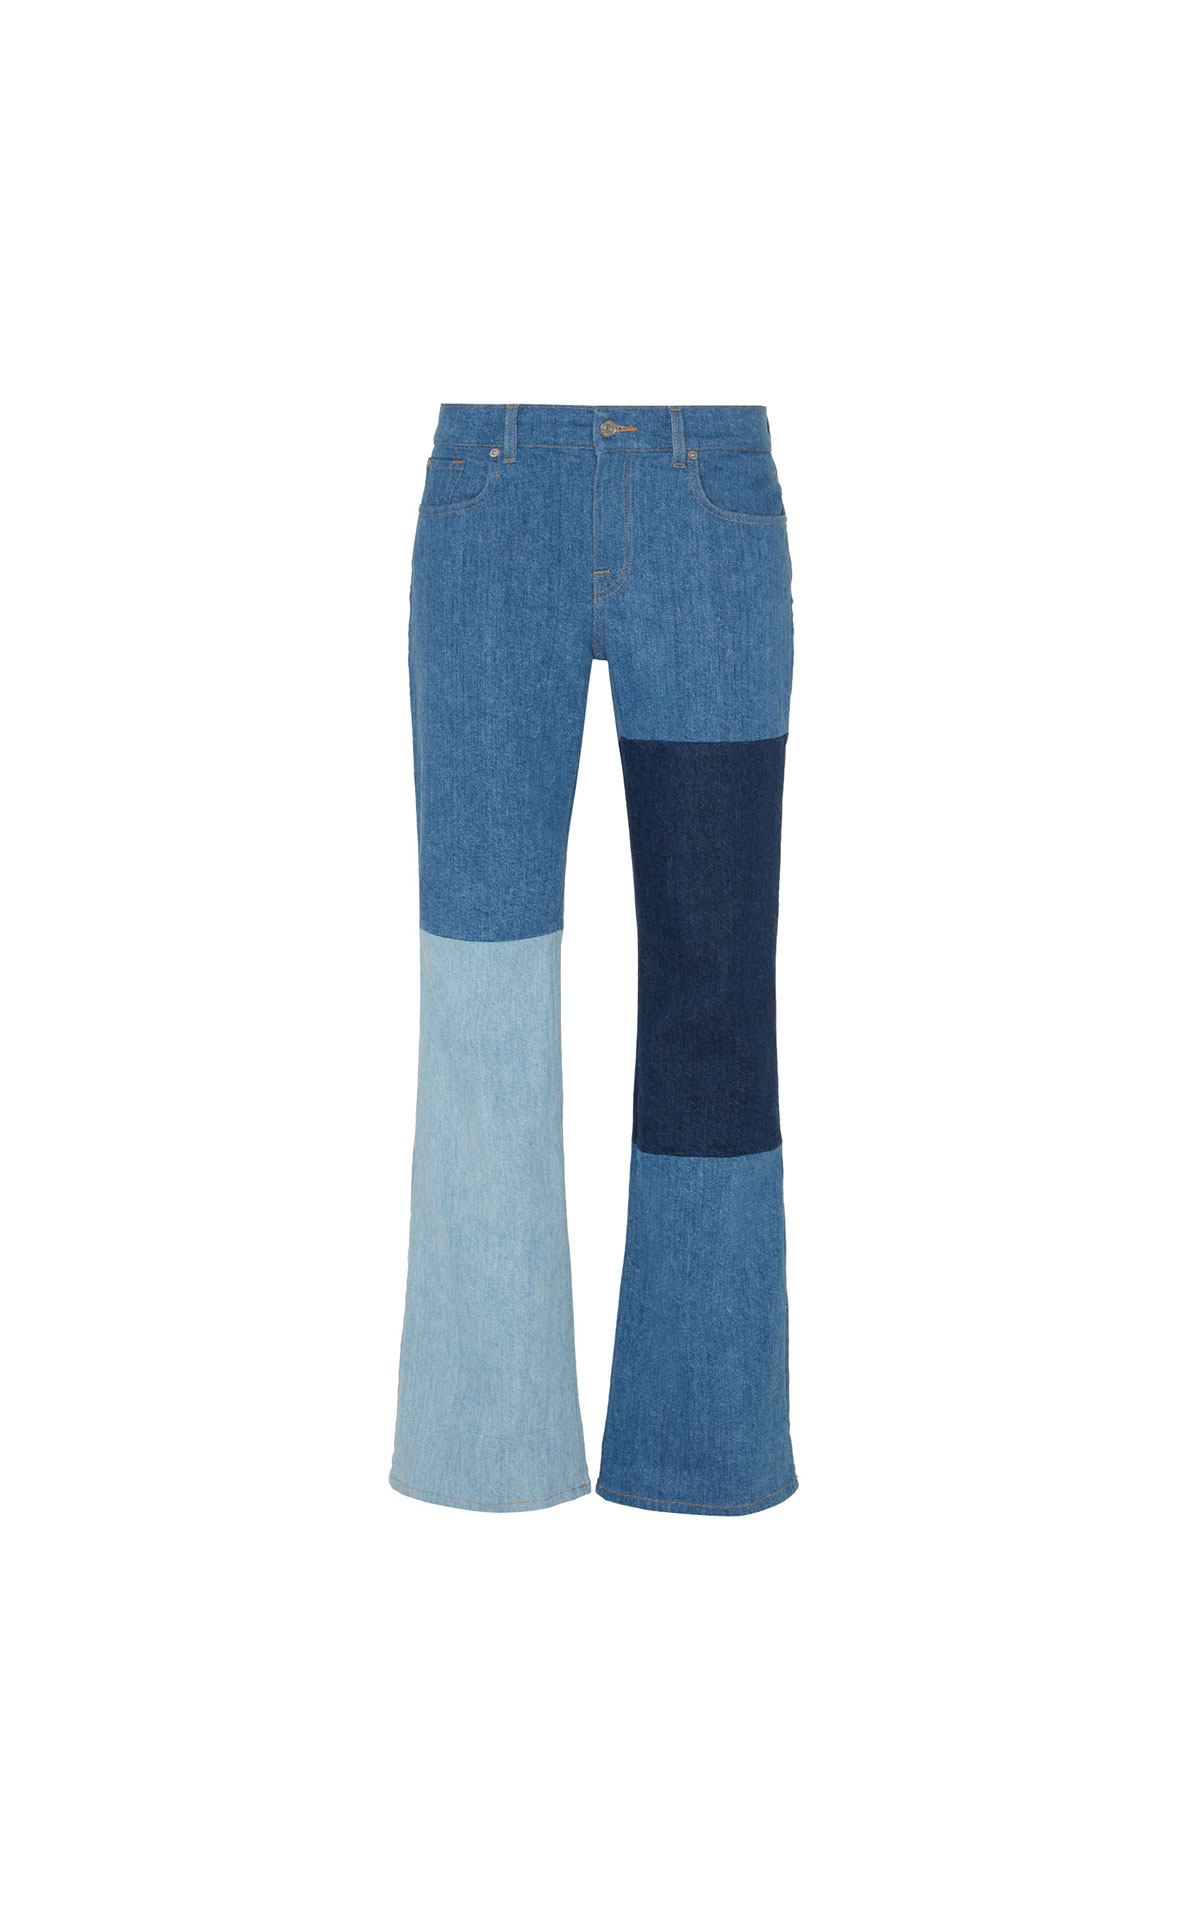 7 for all mankind Bootcut indigo shades from Bicester Village